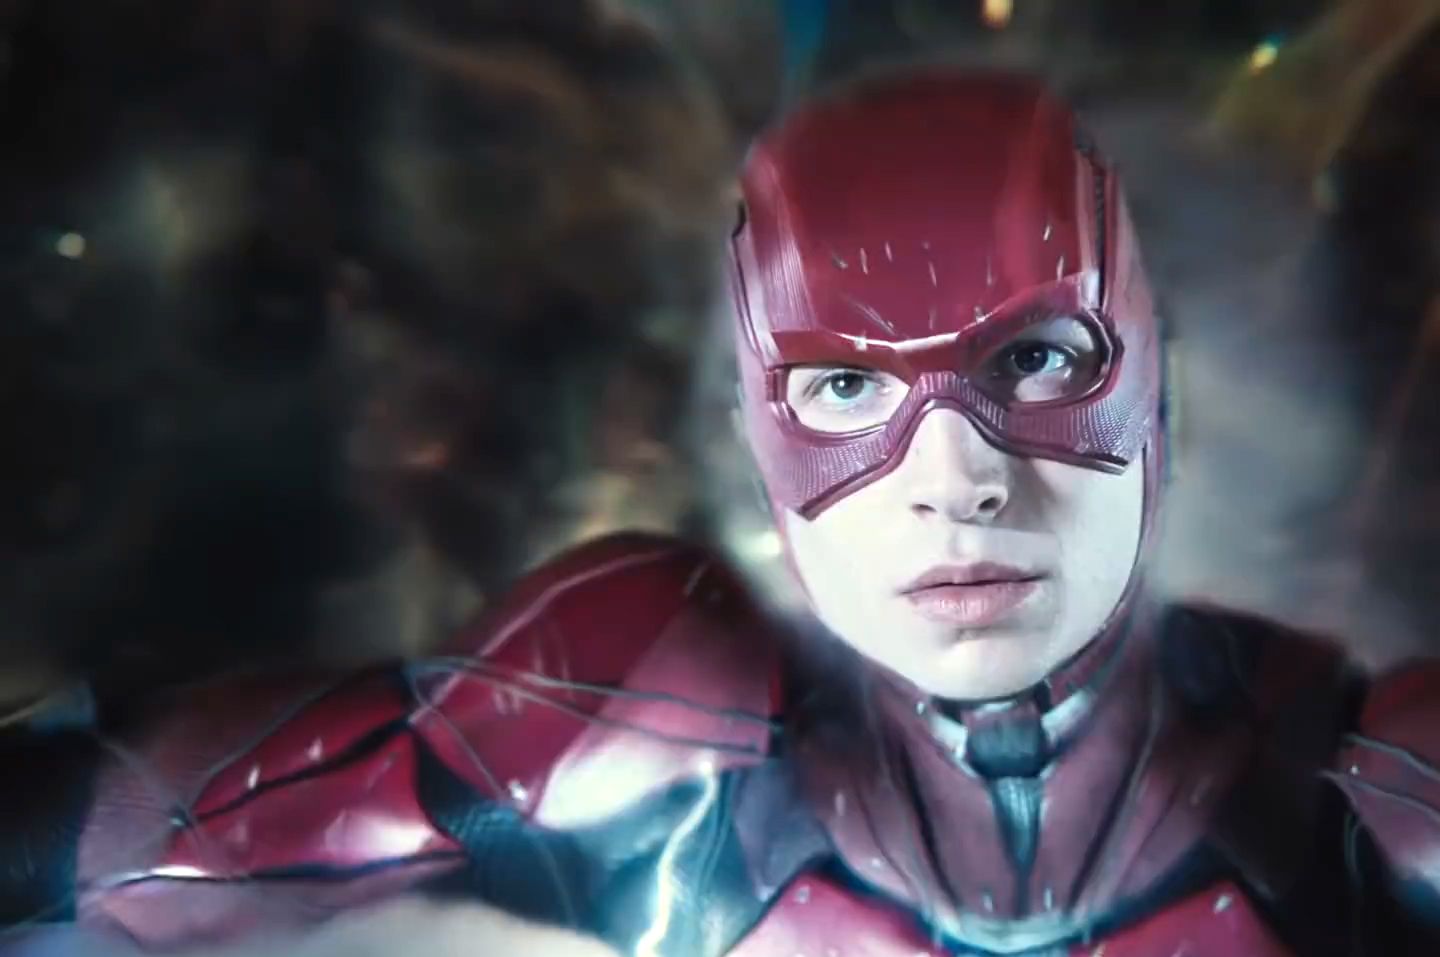 The Flash set photo teases Barry Allen double in new DC movie